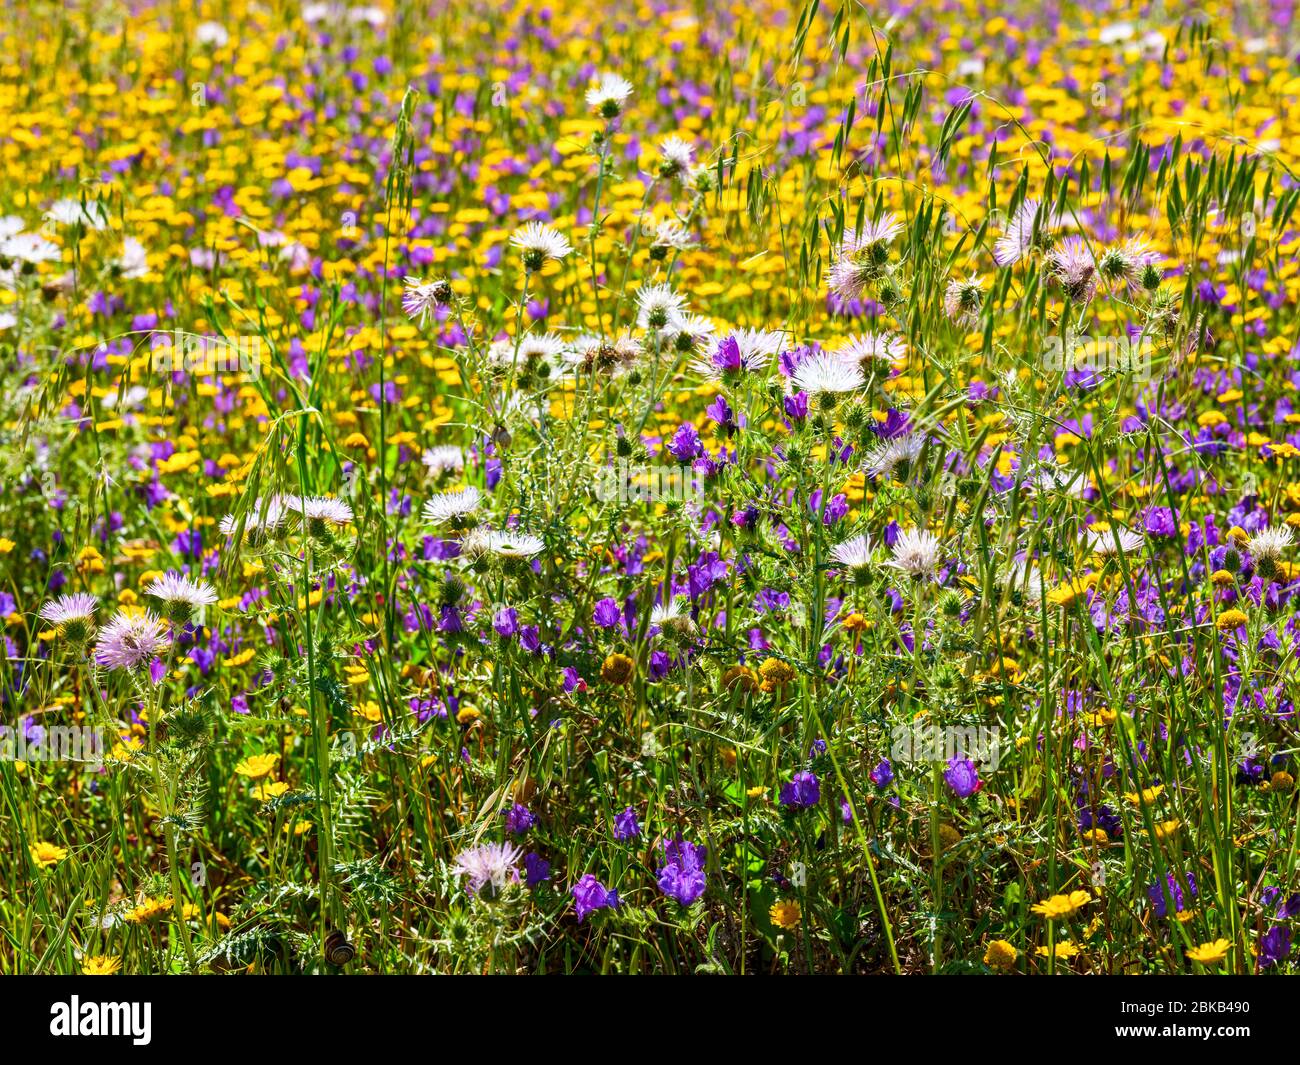 Field blooming in spring with yellow daisies, purple flowers and scarlina Stock Photo